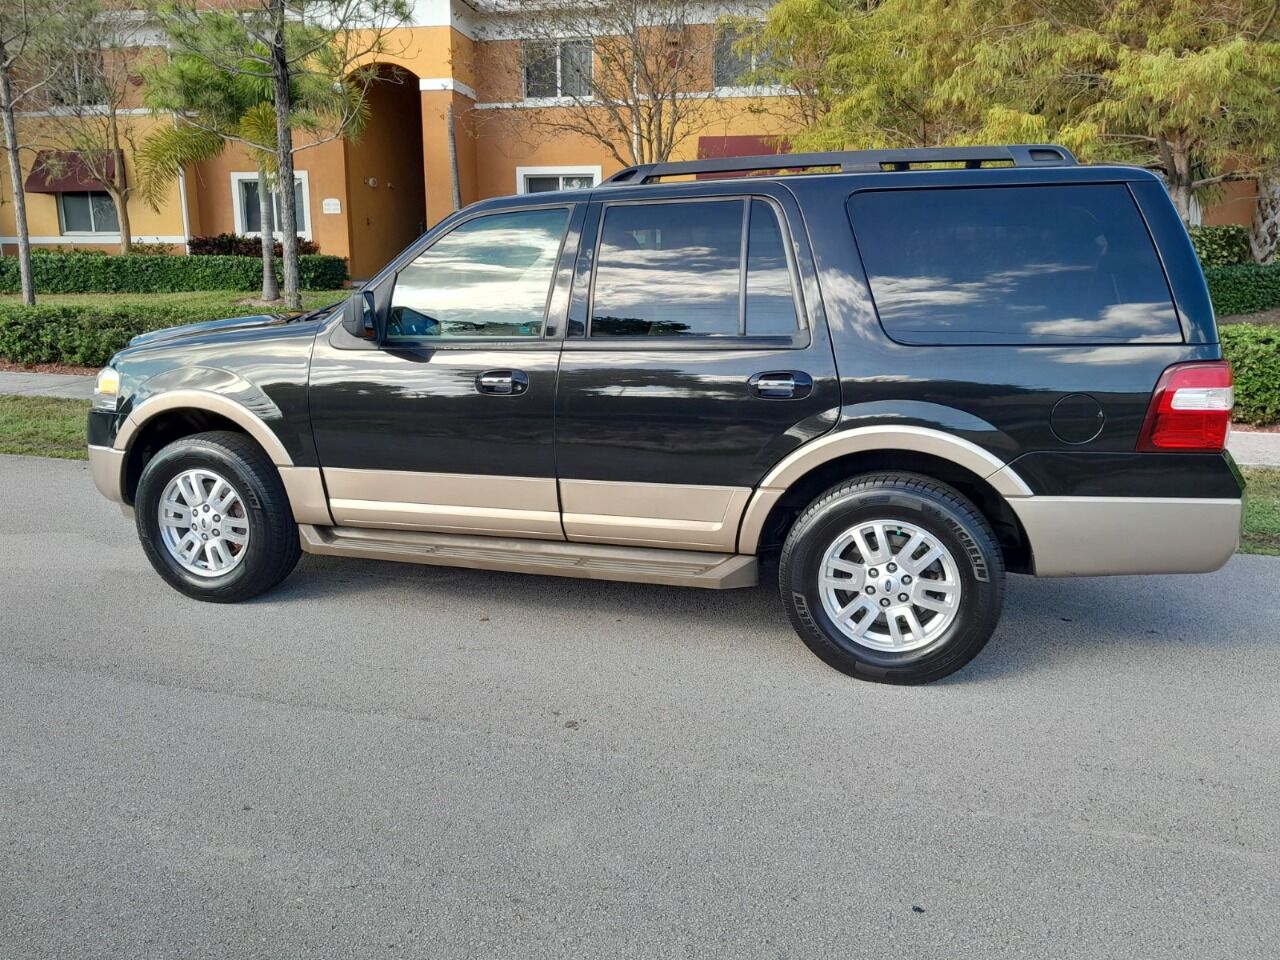 2013 Ford Expedition SUV / Crossover - $7,450